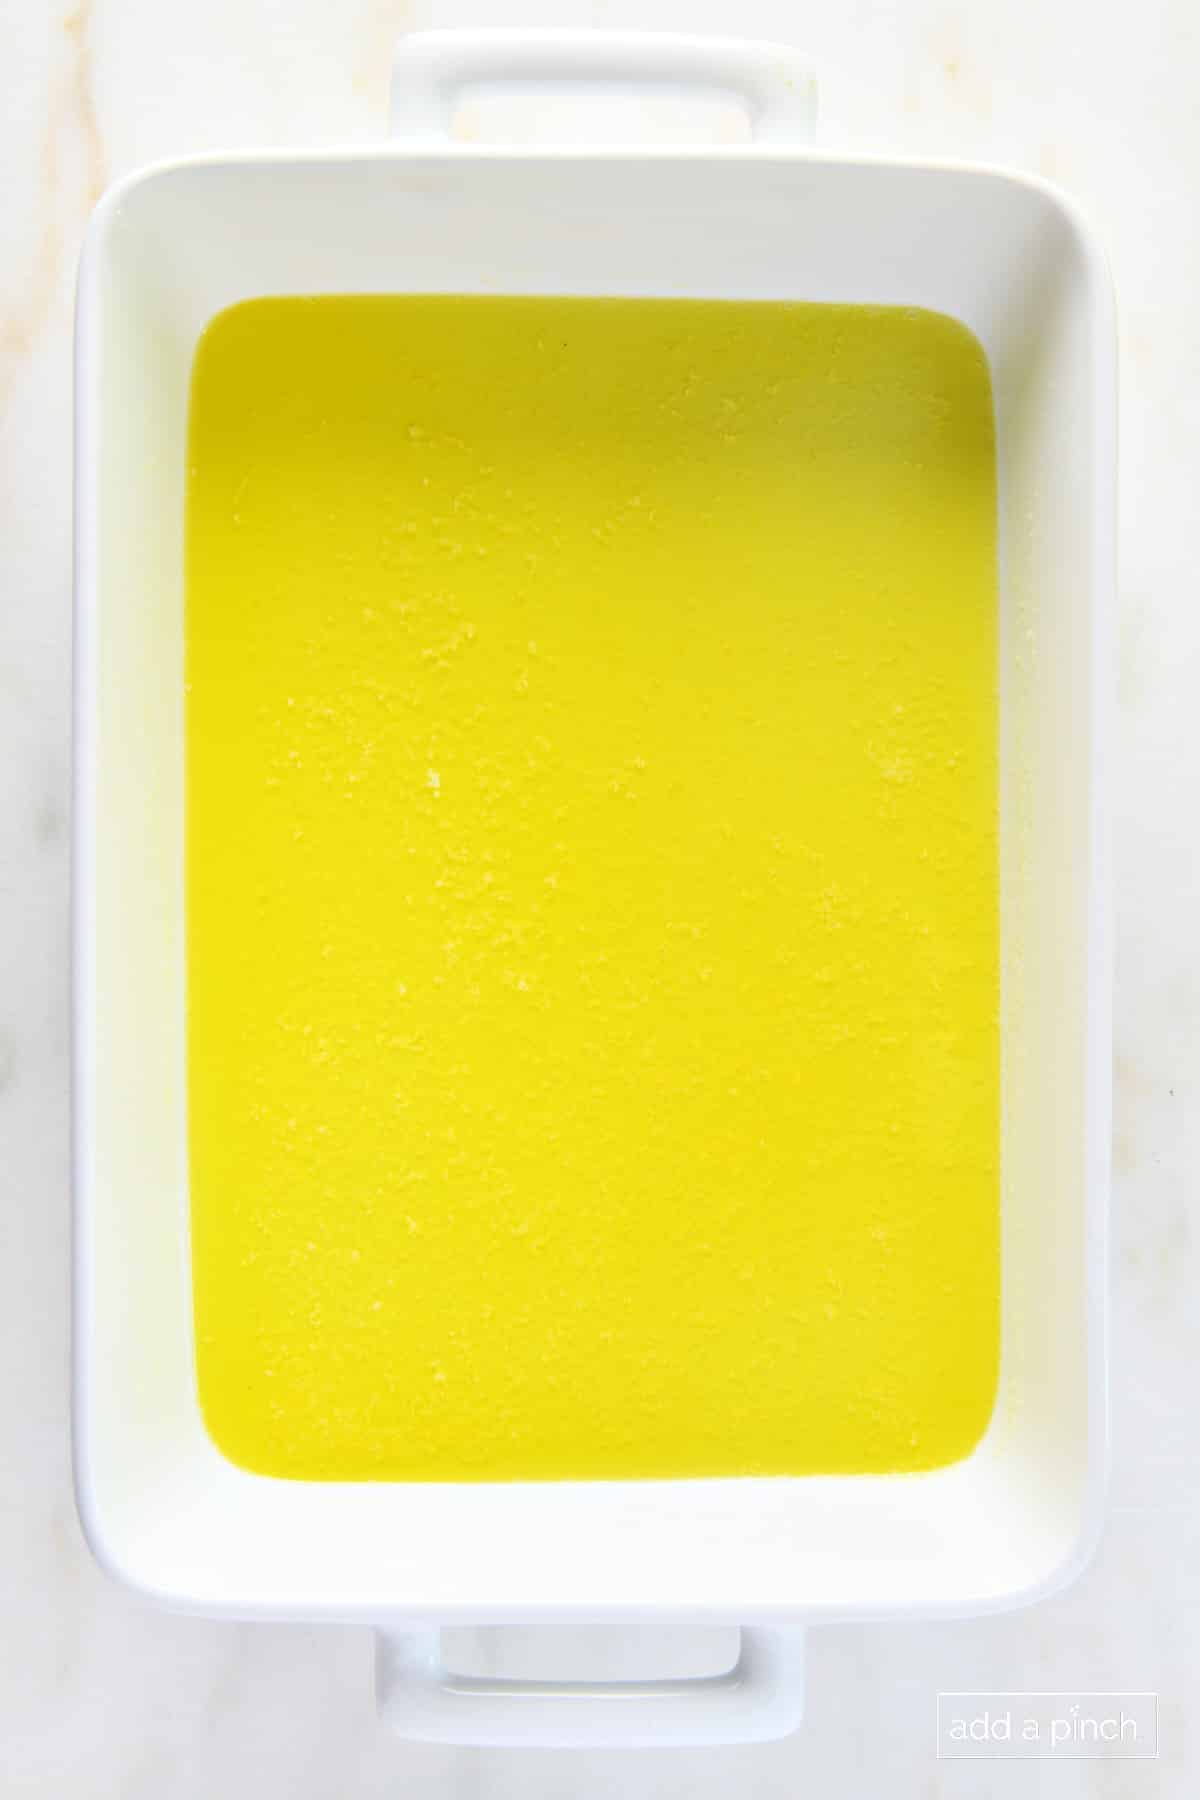 Melted butter in a white baking dish